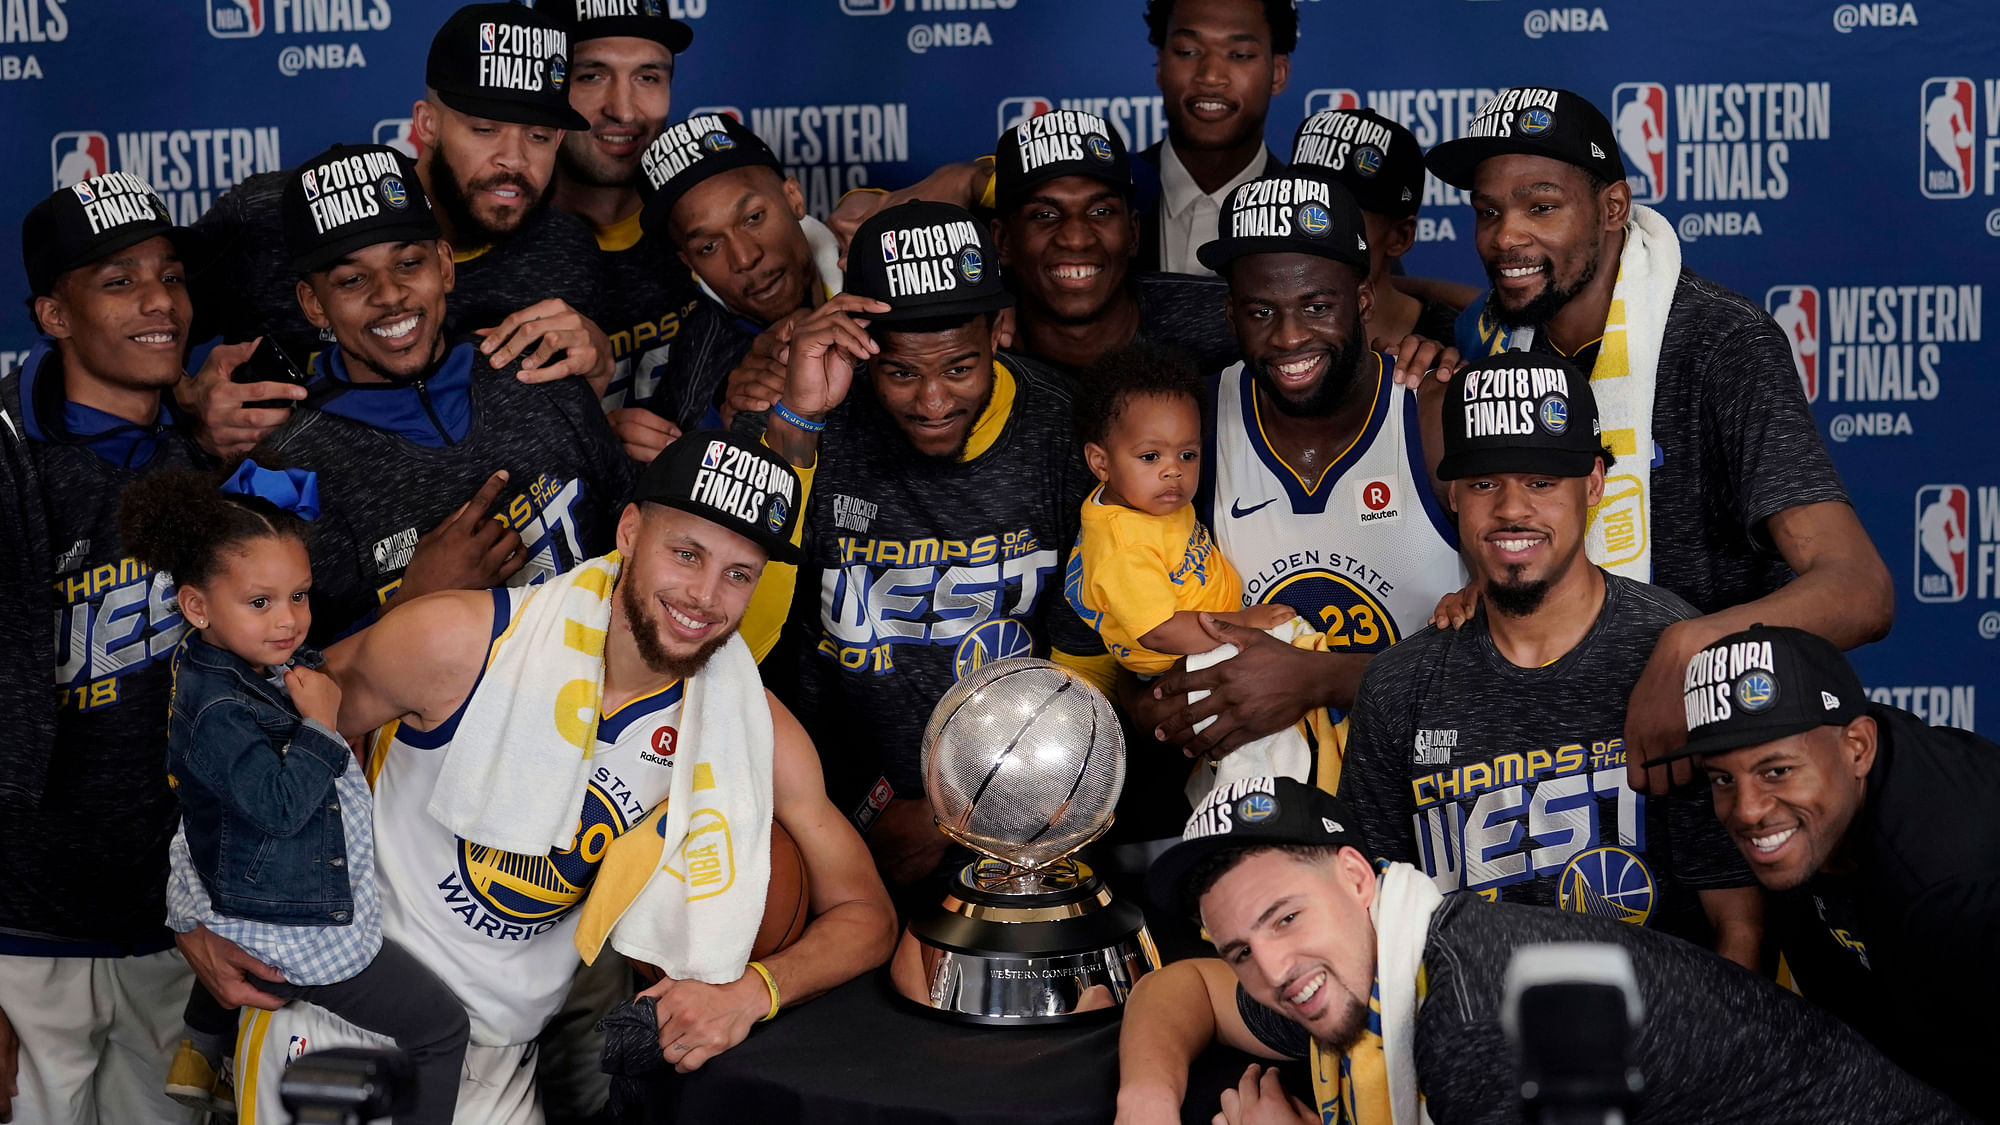 The Golden State Warriors pose with their trophy after defeating the Houston Rockets in Game 7 of the NBA basketball Western Conference finals, Monday, May 28, 2018.